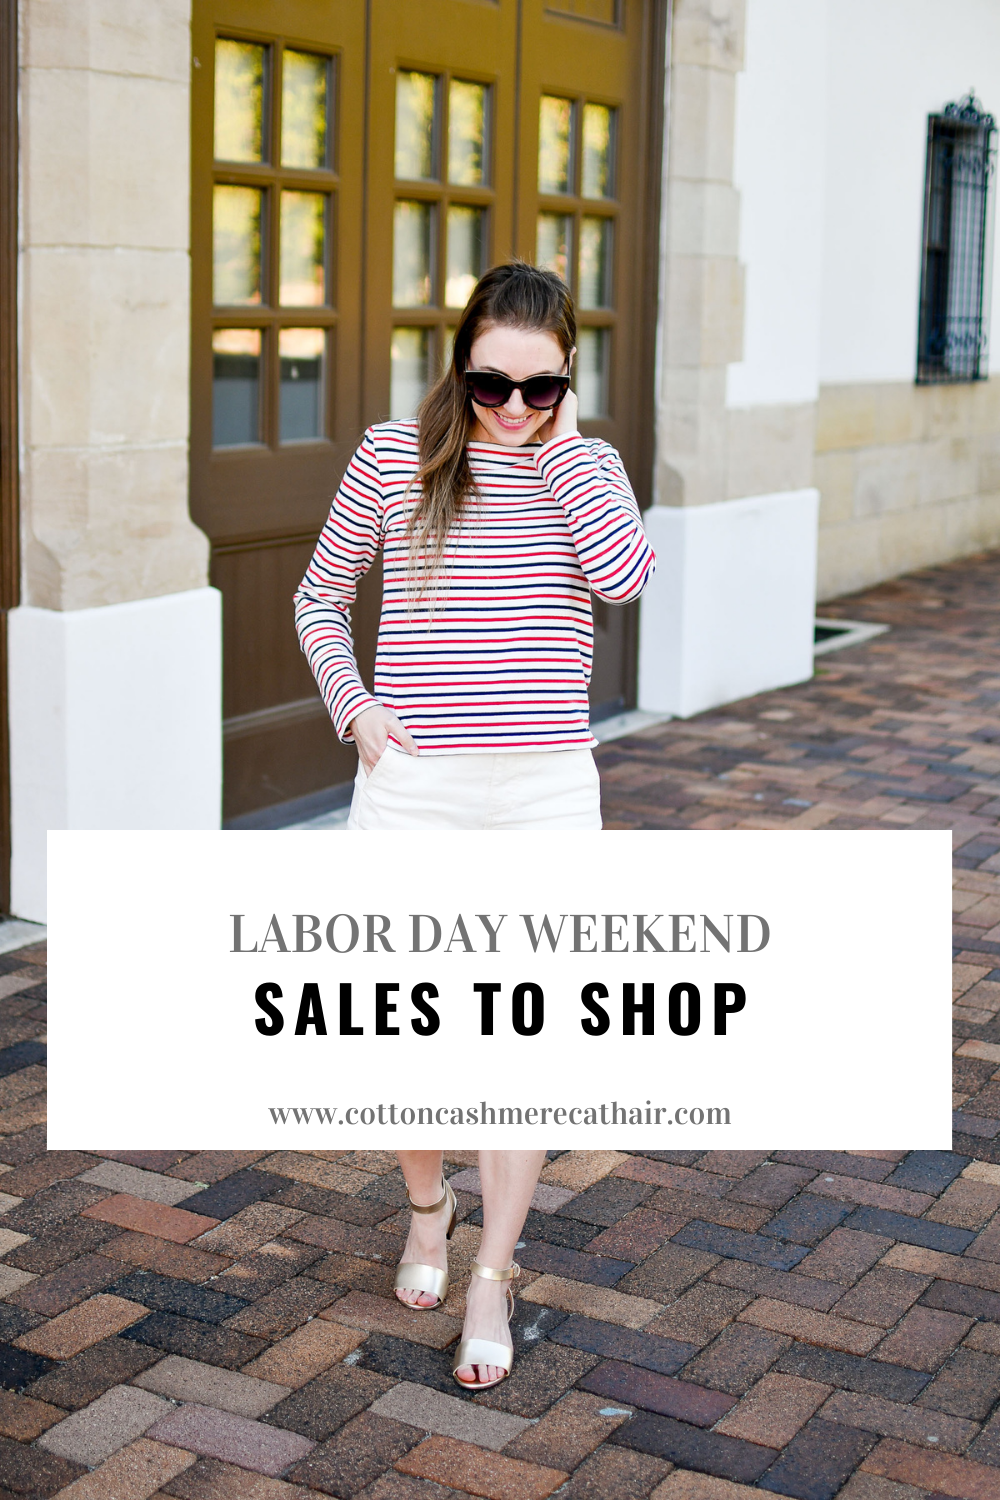 2020 Labor Day weekend sales to shop